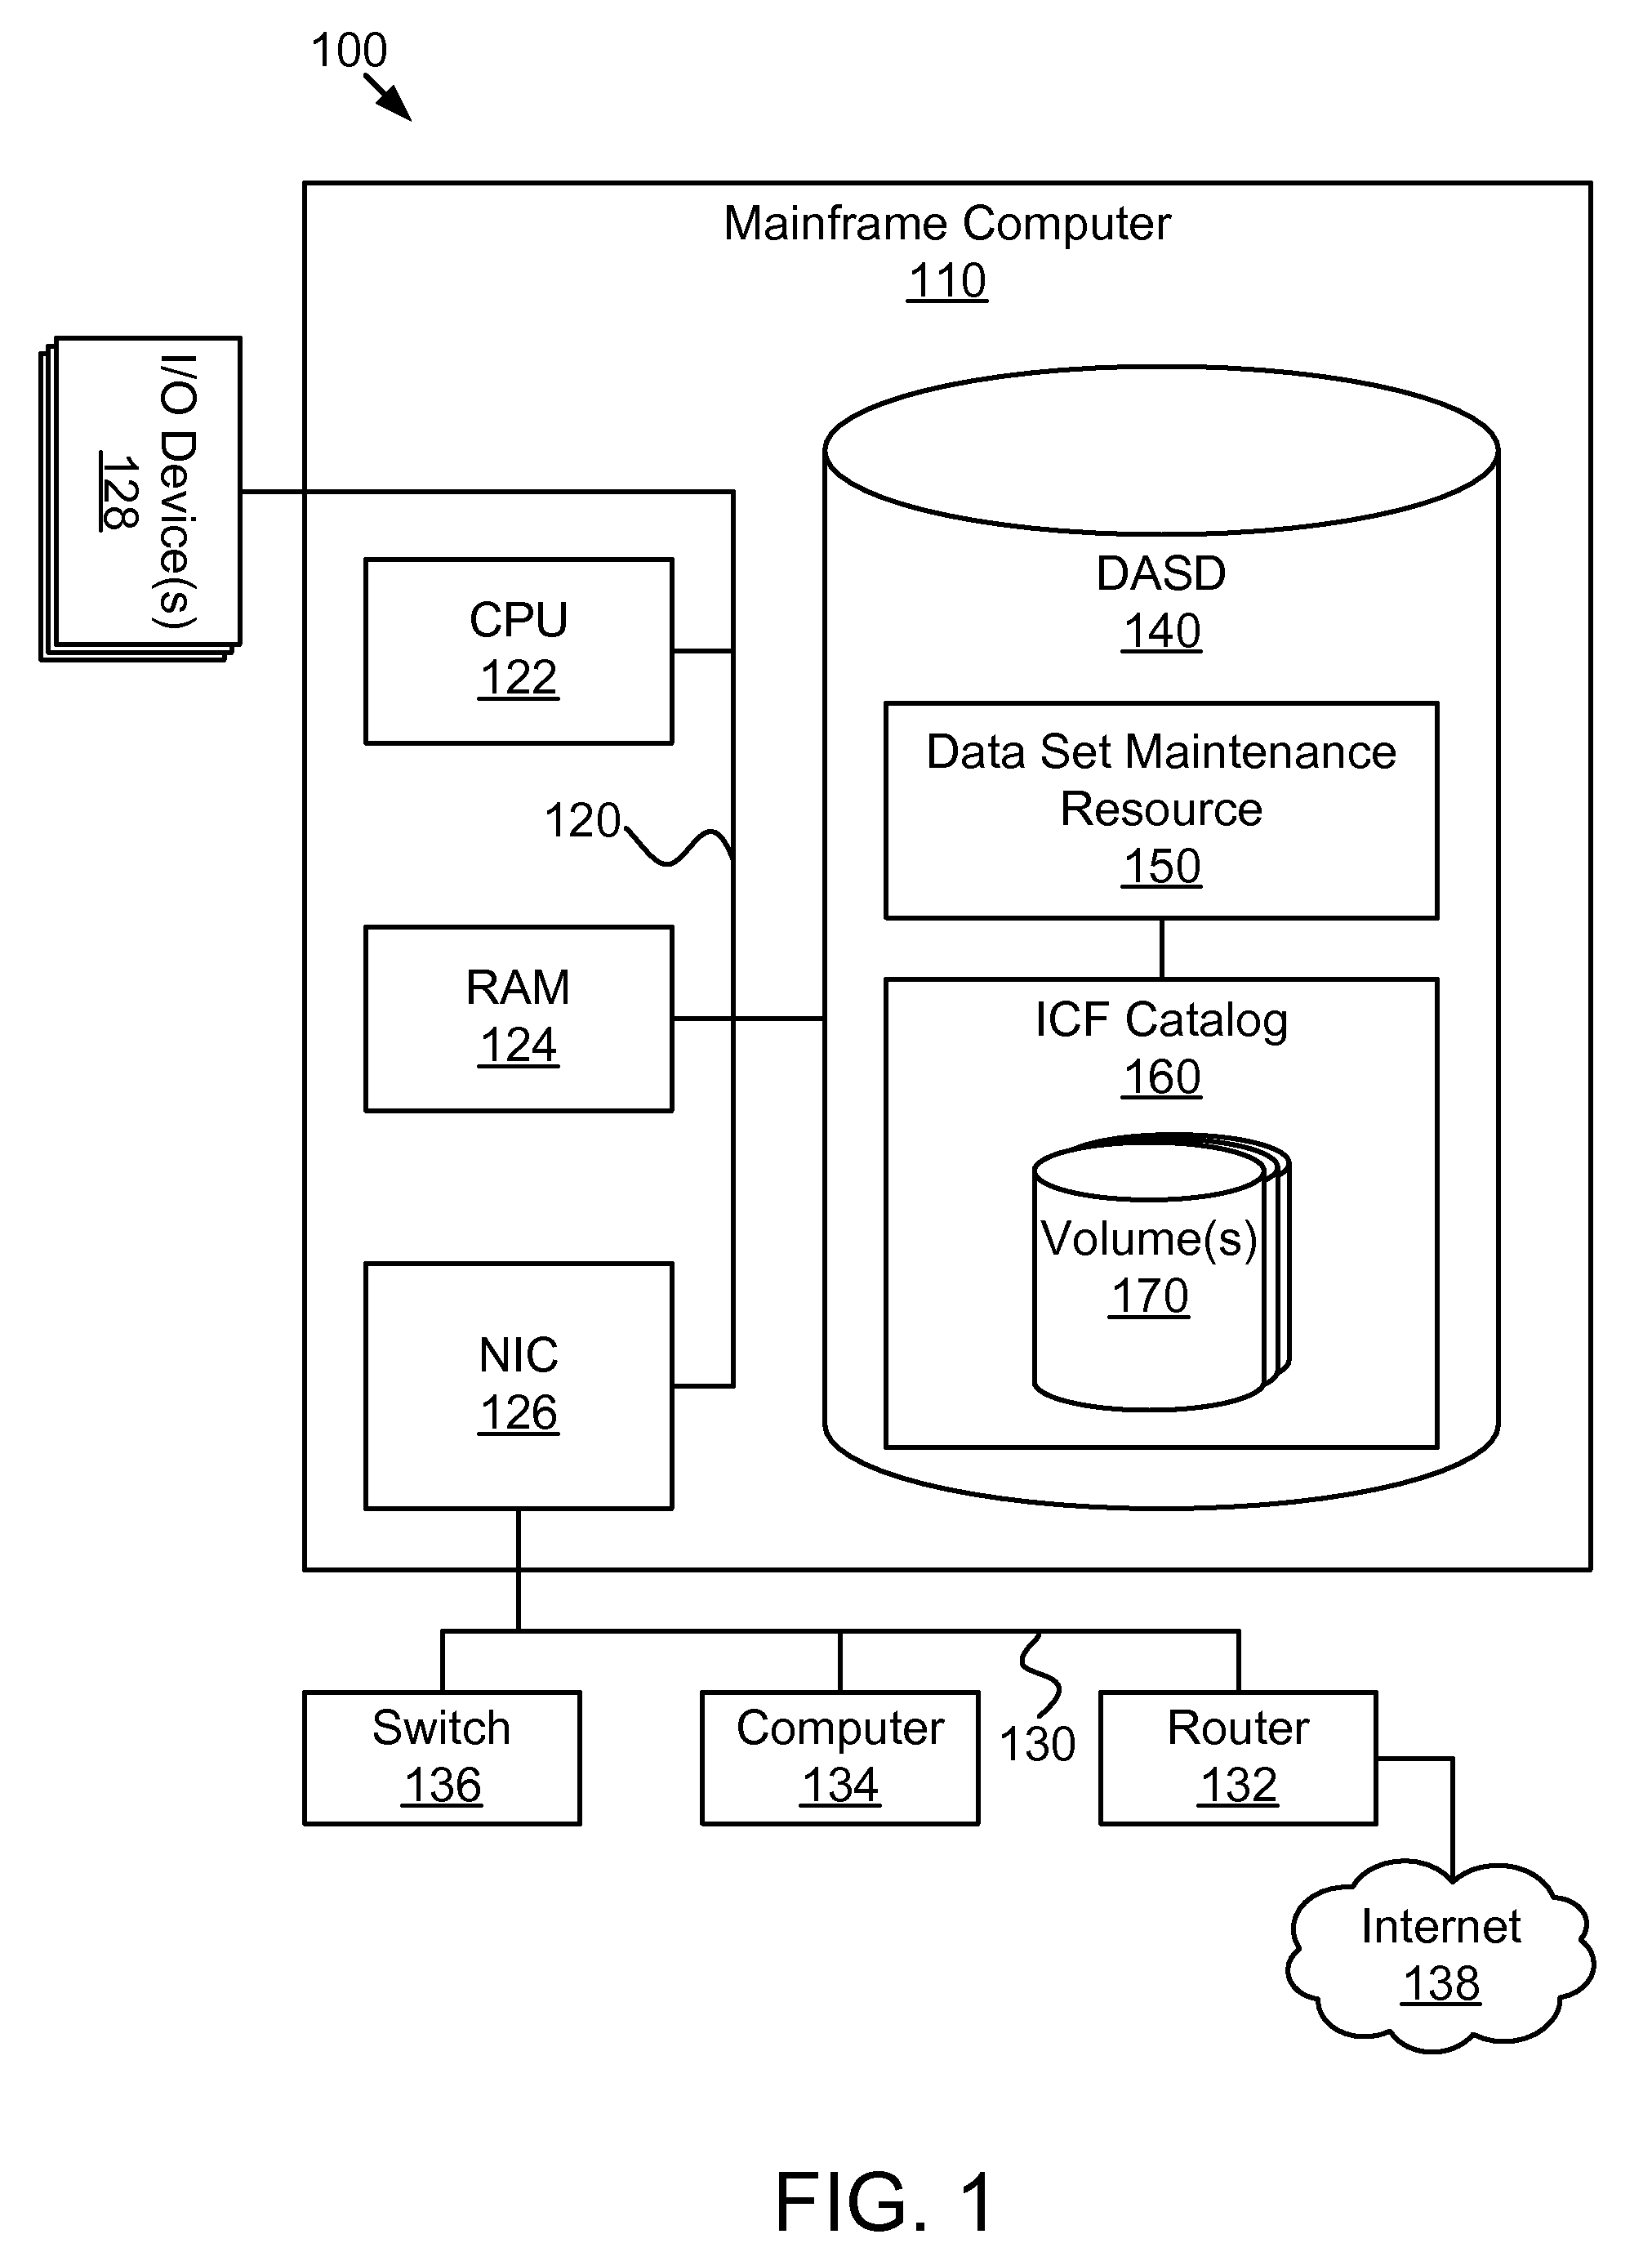 Apparatus, system, and method for automating vtoc driven data set maintenance